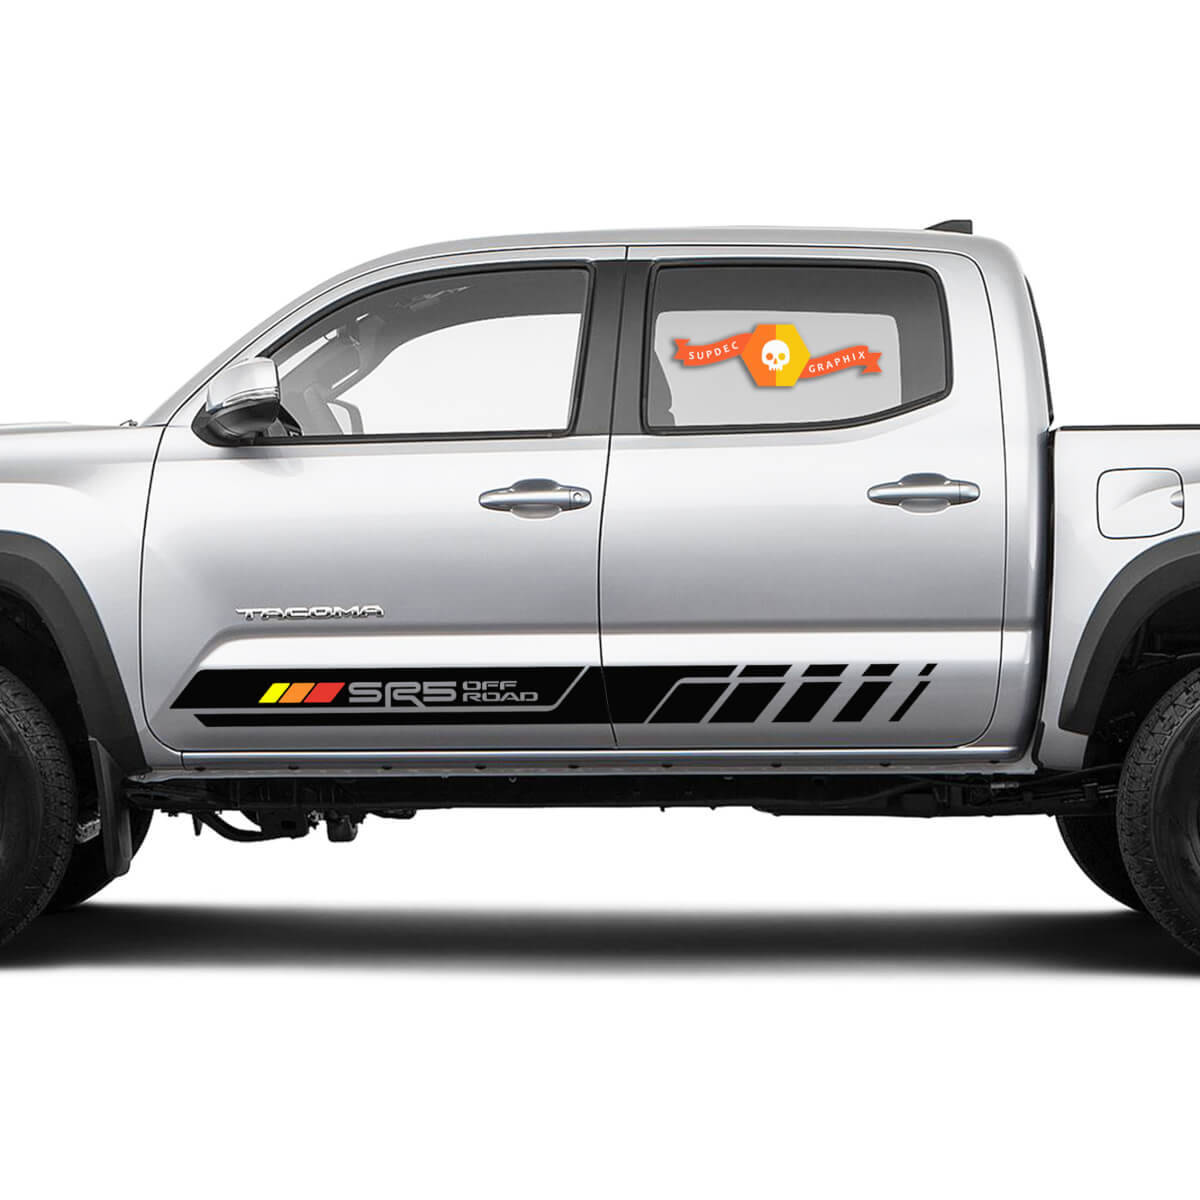 2 Tacoma SR5 Toyota Side Bed Doors Rocker Panel stripes Stickers TRD Vinyl Stickers Decal Kit for Toyota Tacoma